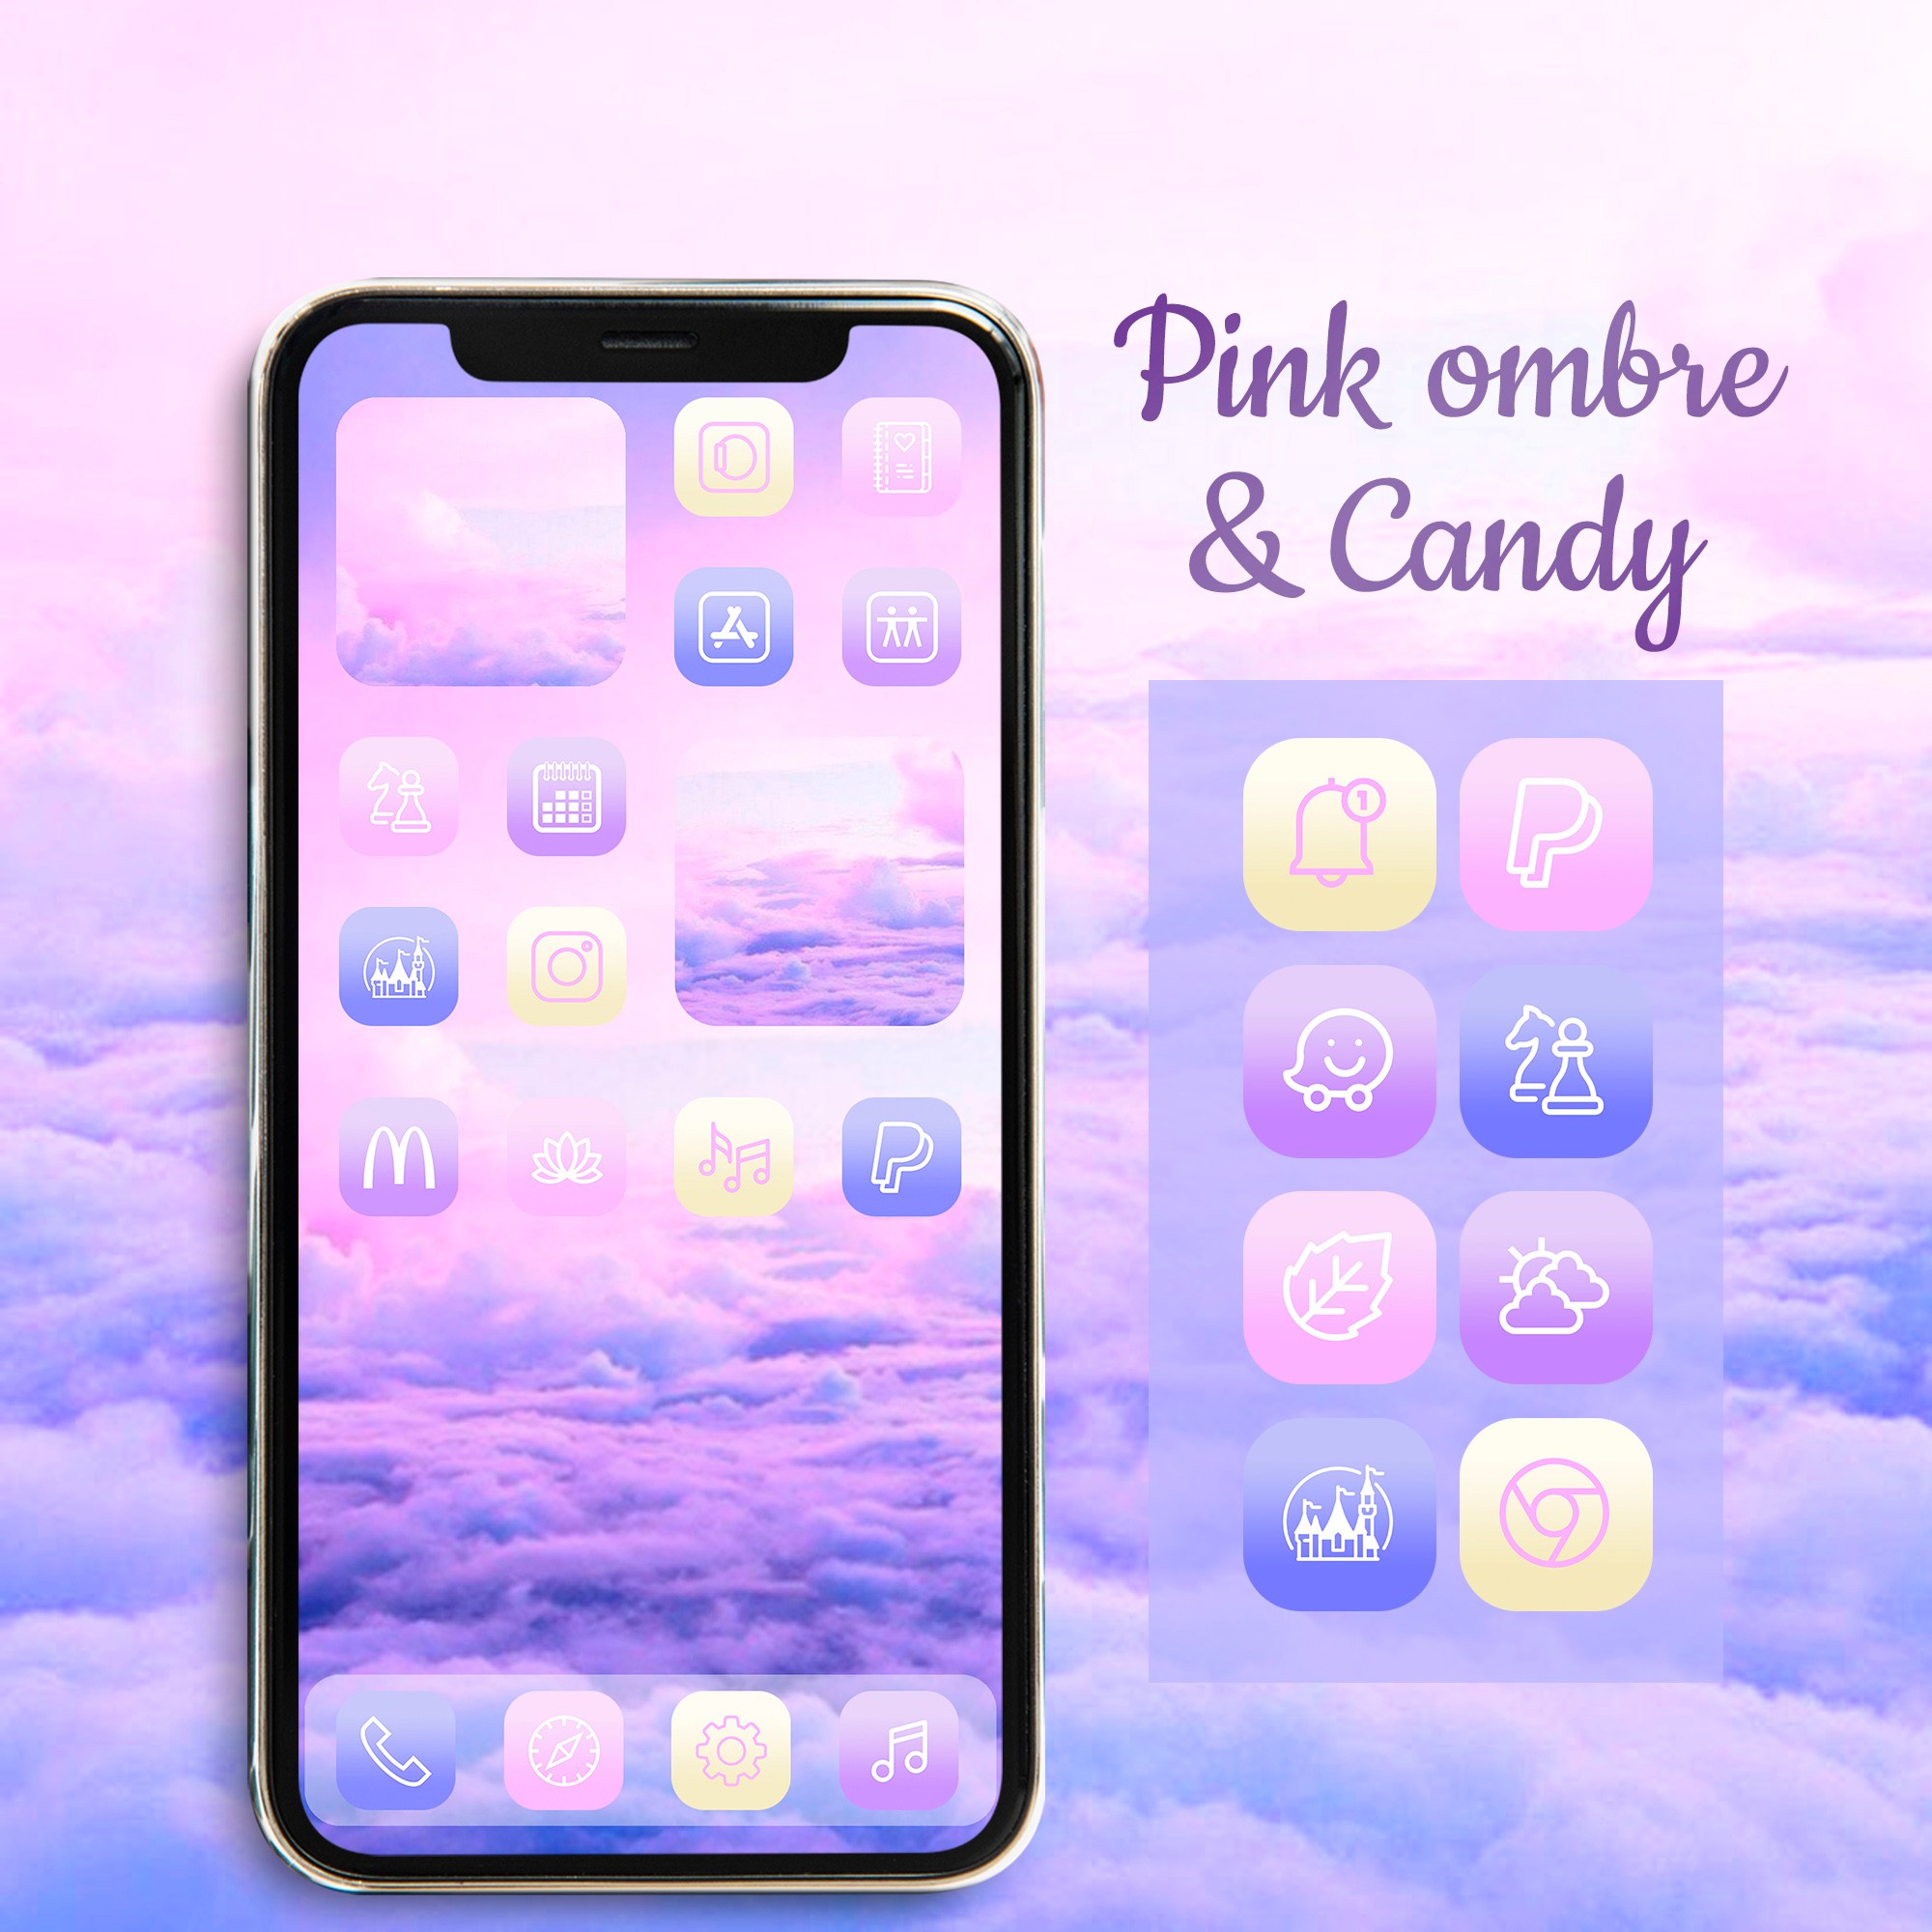 Divinity Candy Digital Aesthetic App Icons For Ios 14 And Pink Ombre Social Media Widget Icon For Iphone Ios14 Pastel Cute Home Screen Theme Teletype Download for free in png, svg, pdf formats 👆. teletype